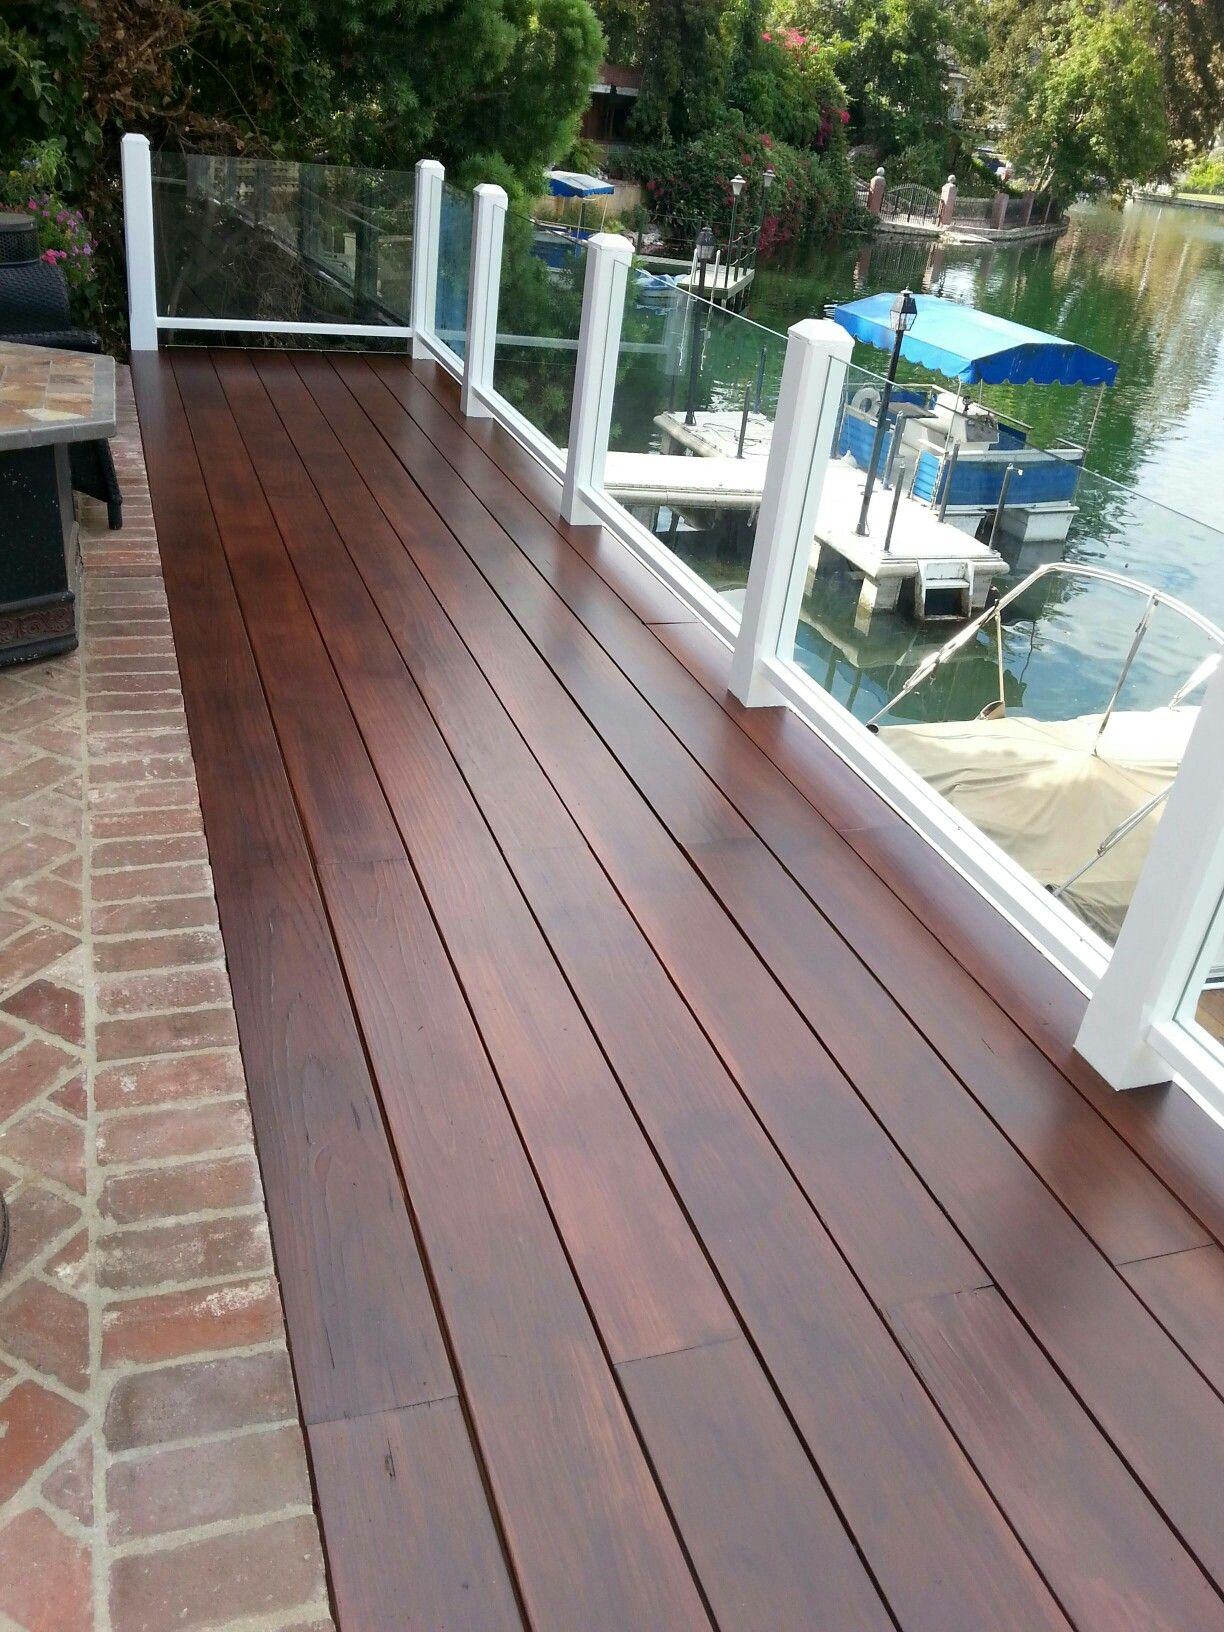 Toluca Lake Ca In 2019 Houses Deck Stain Colors Deck pertaining to sizing 1224 X 1632